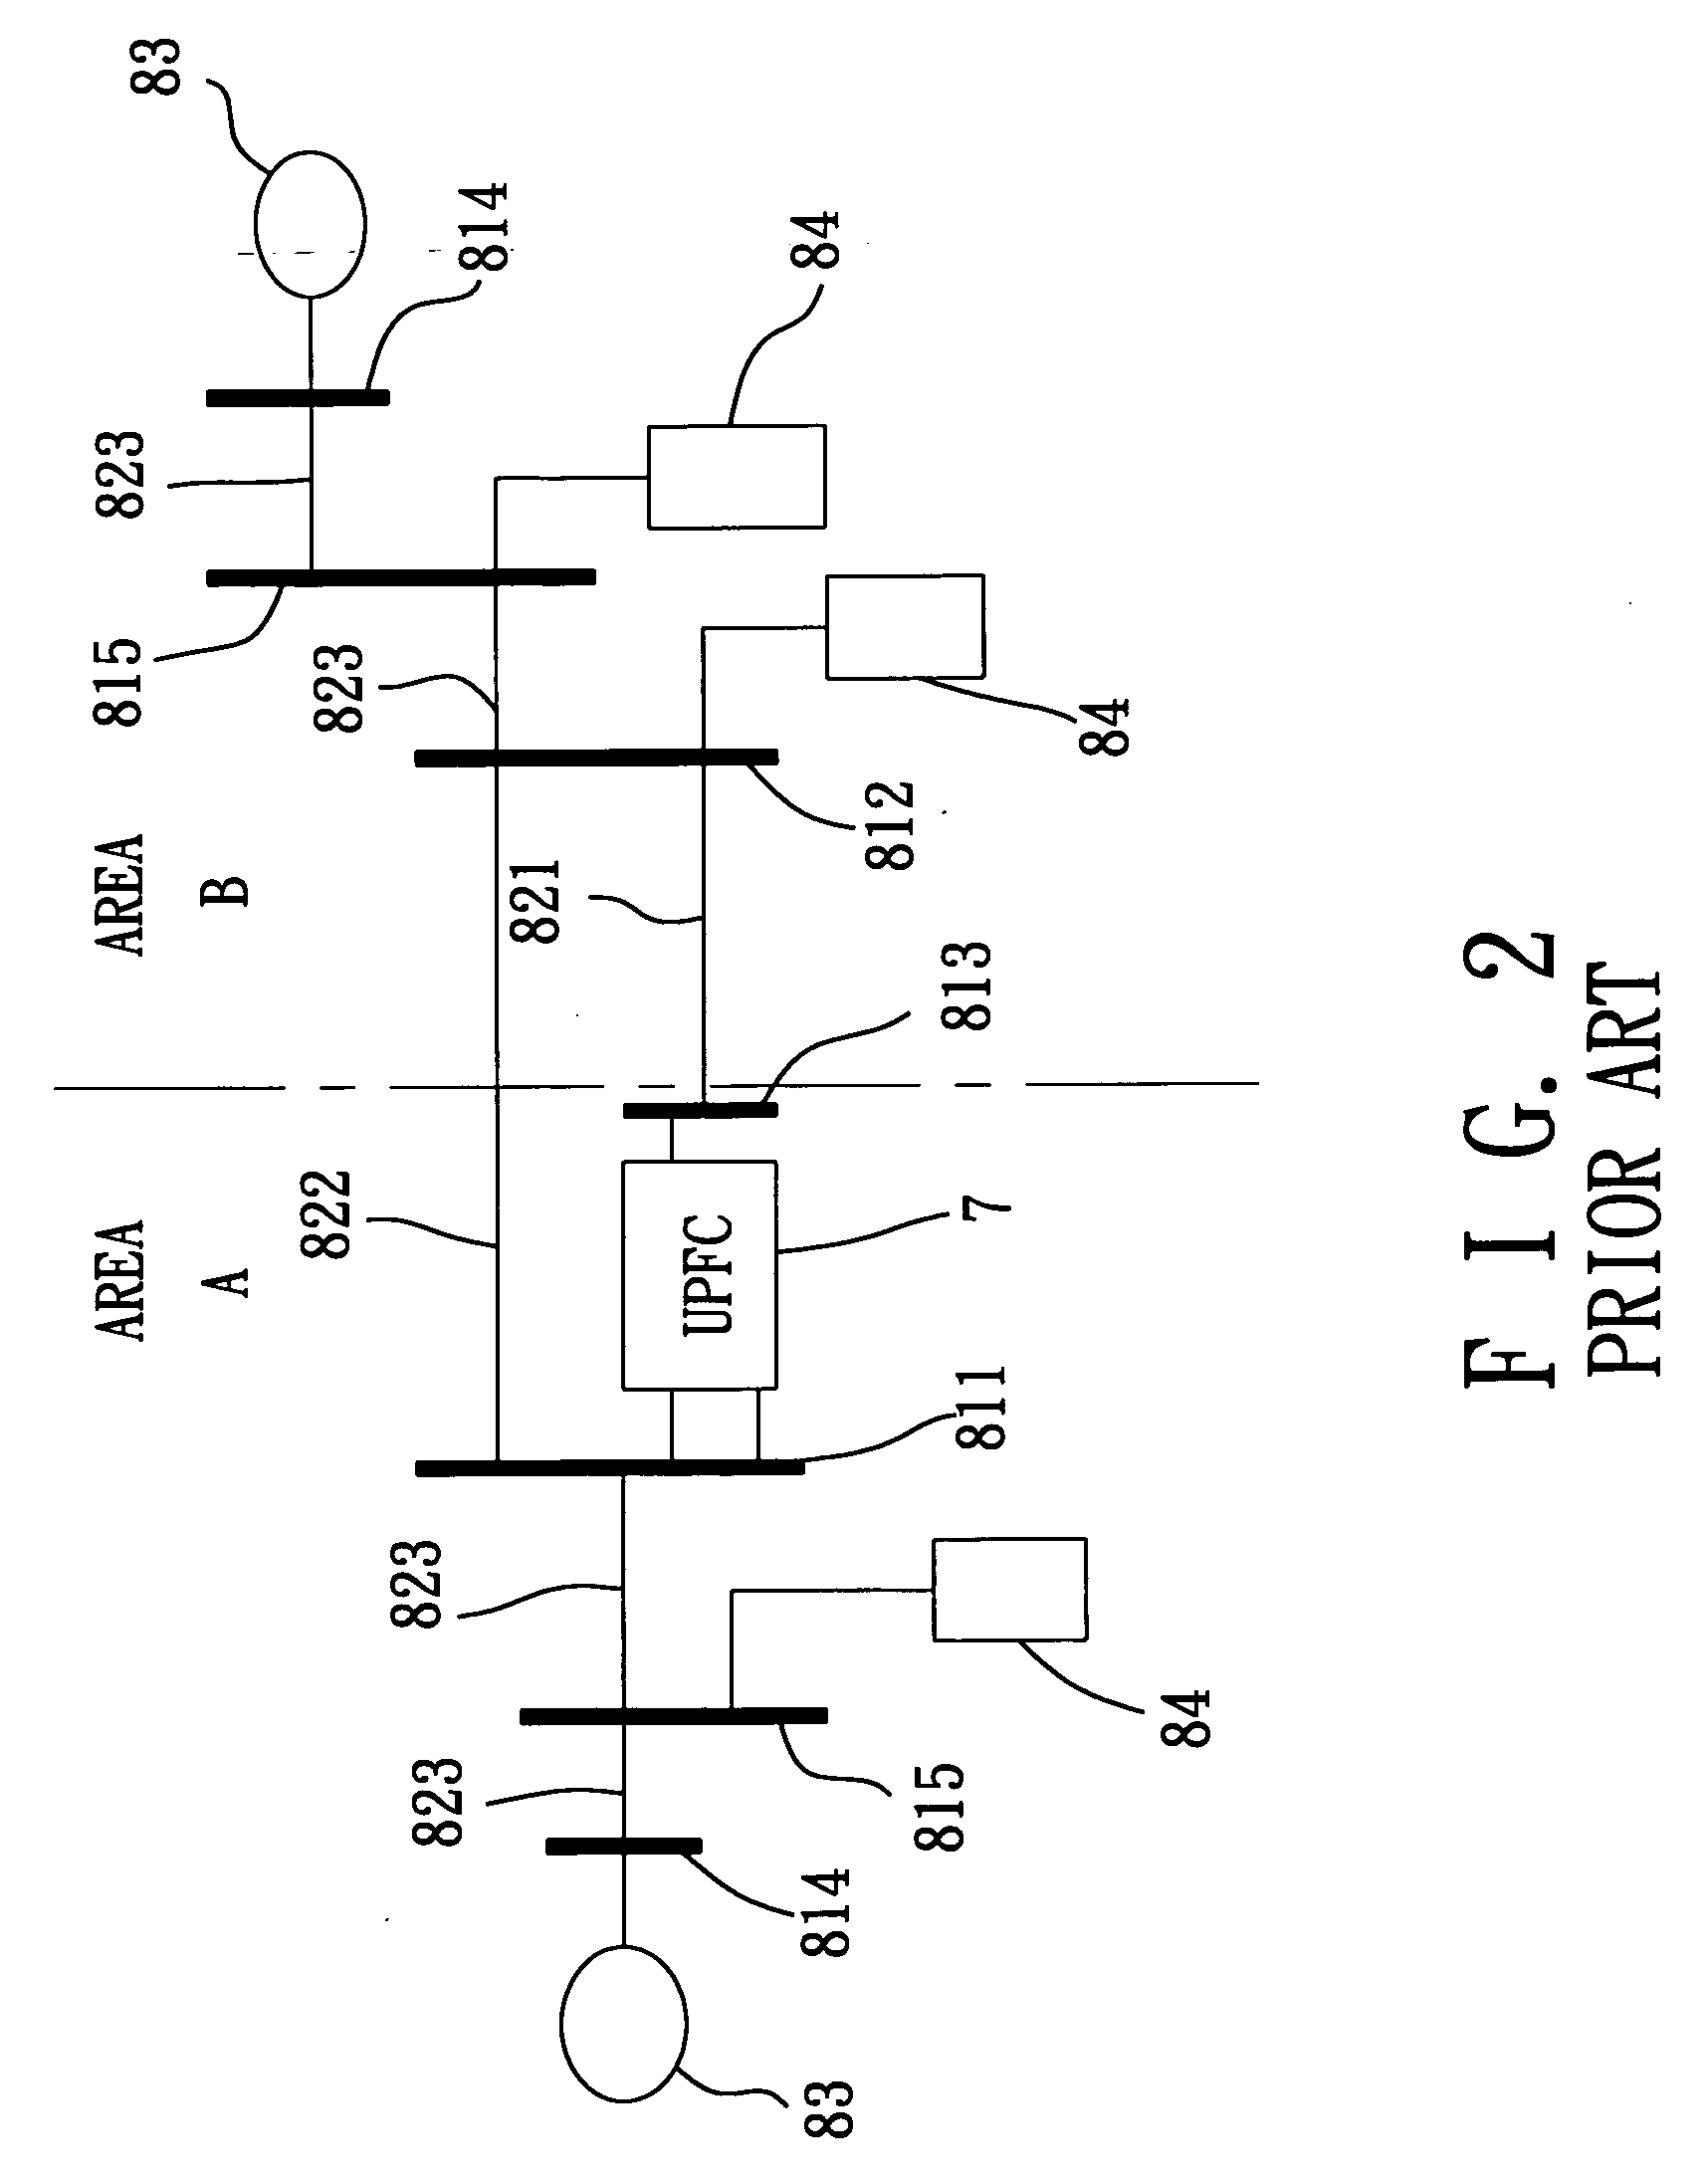 Method for calculating power flow solution of a power transmission network that includes unified power flow controllers